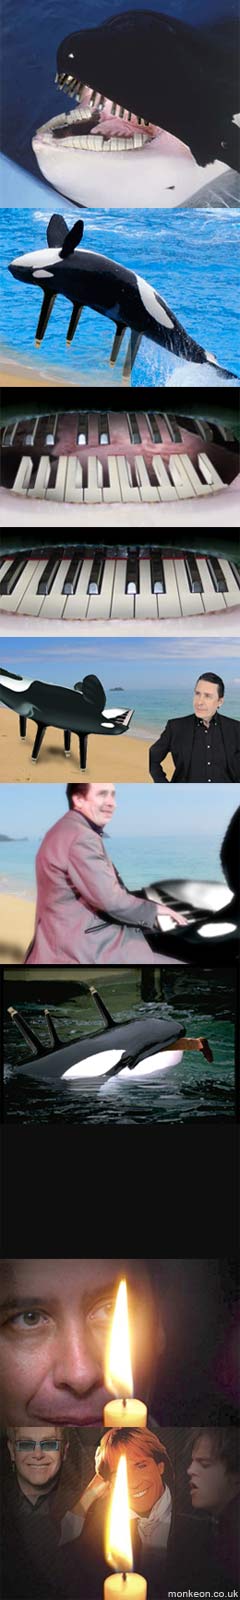 It's evolved to live off pianists